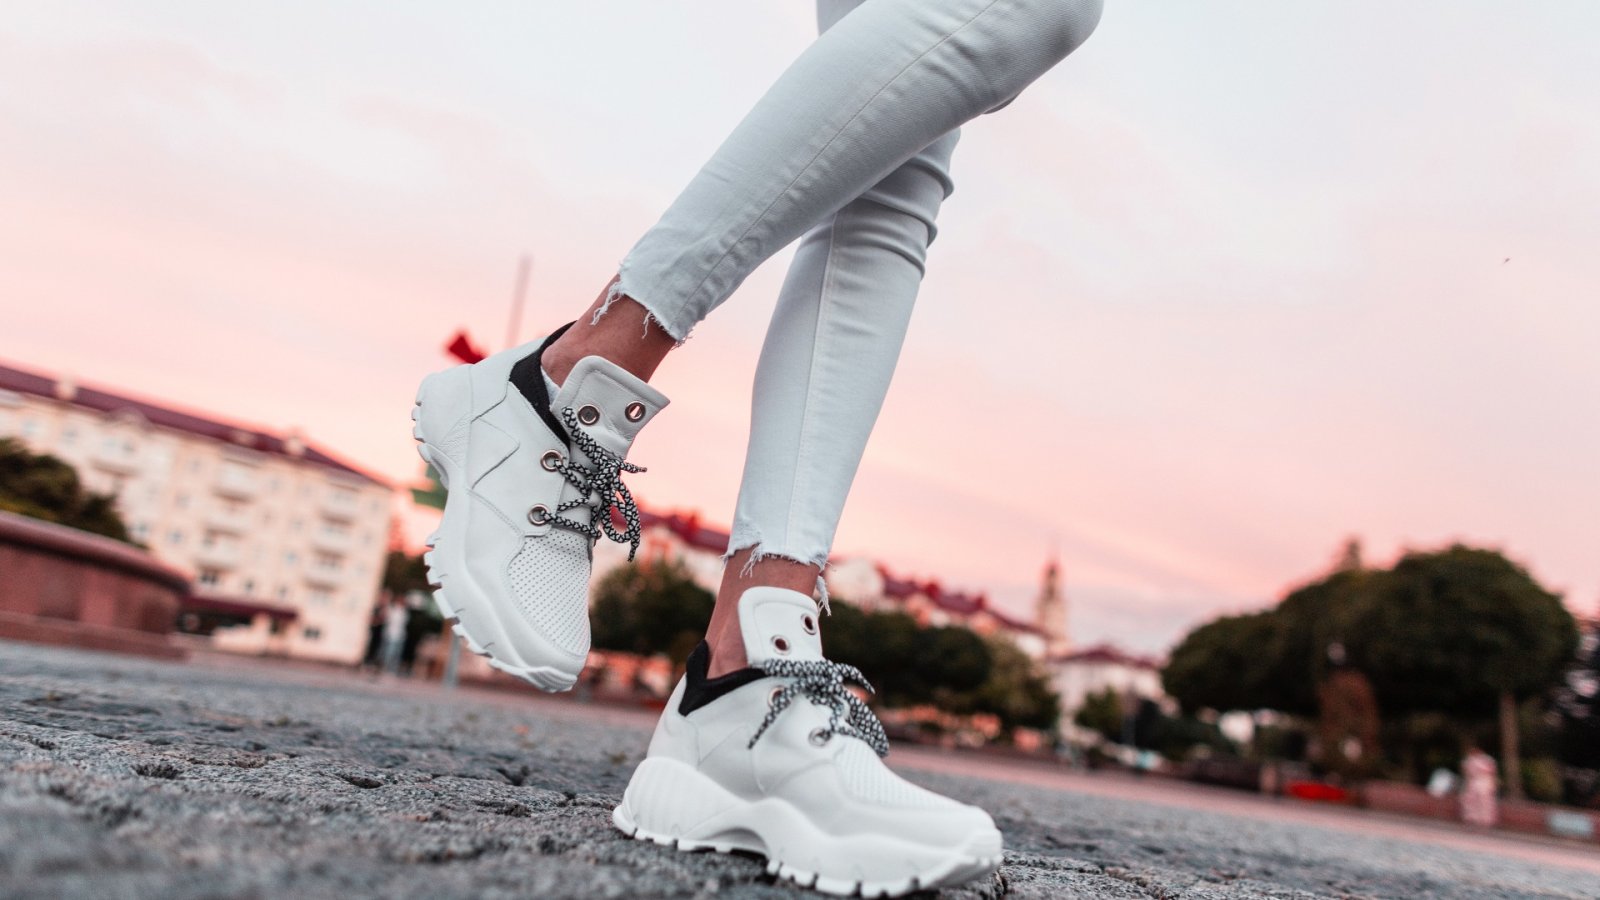 These sneakers scream style whatever the trends are currently